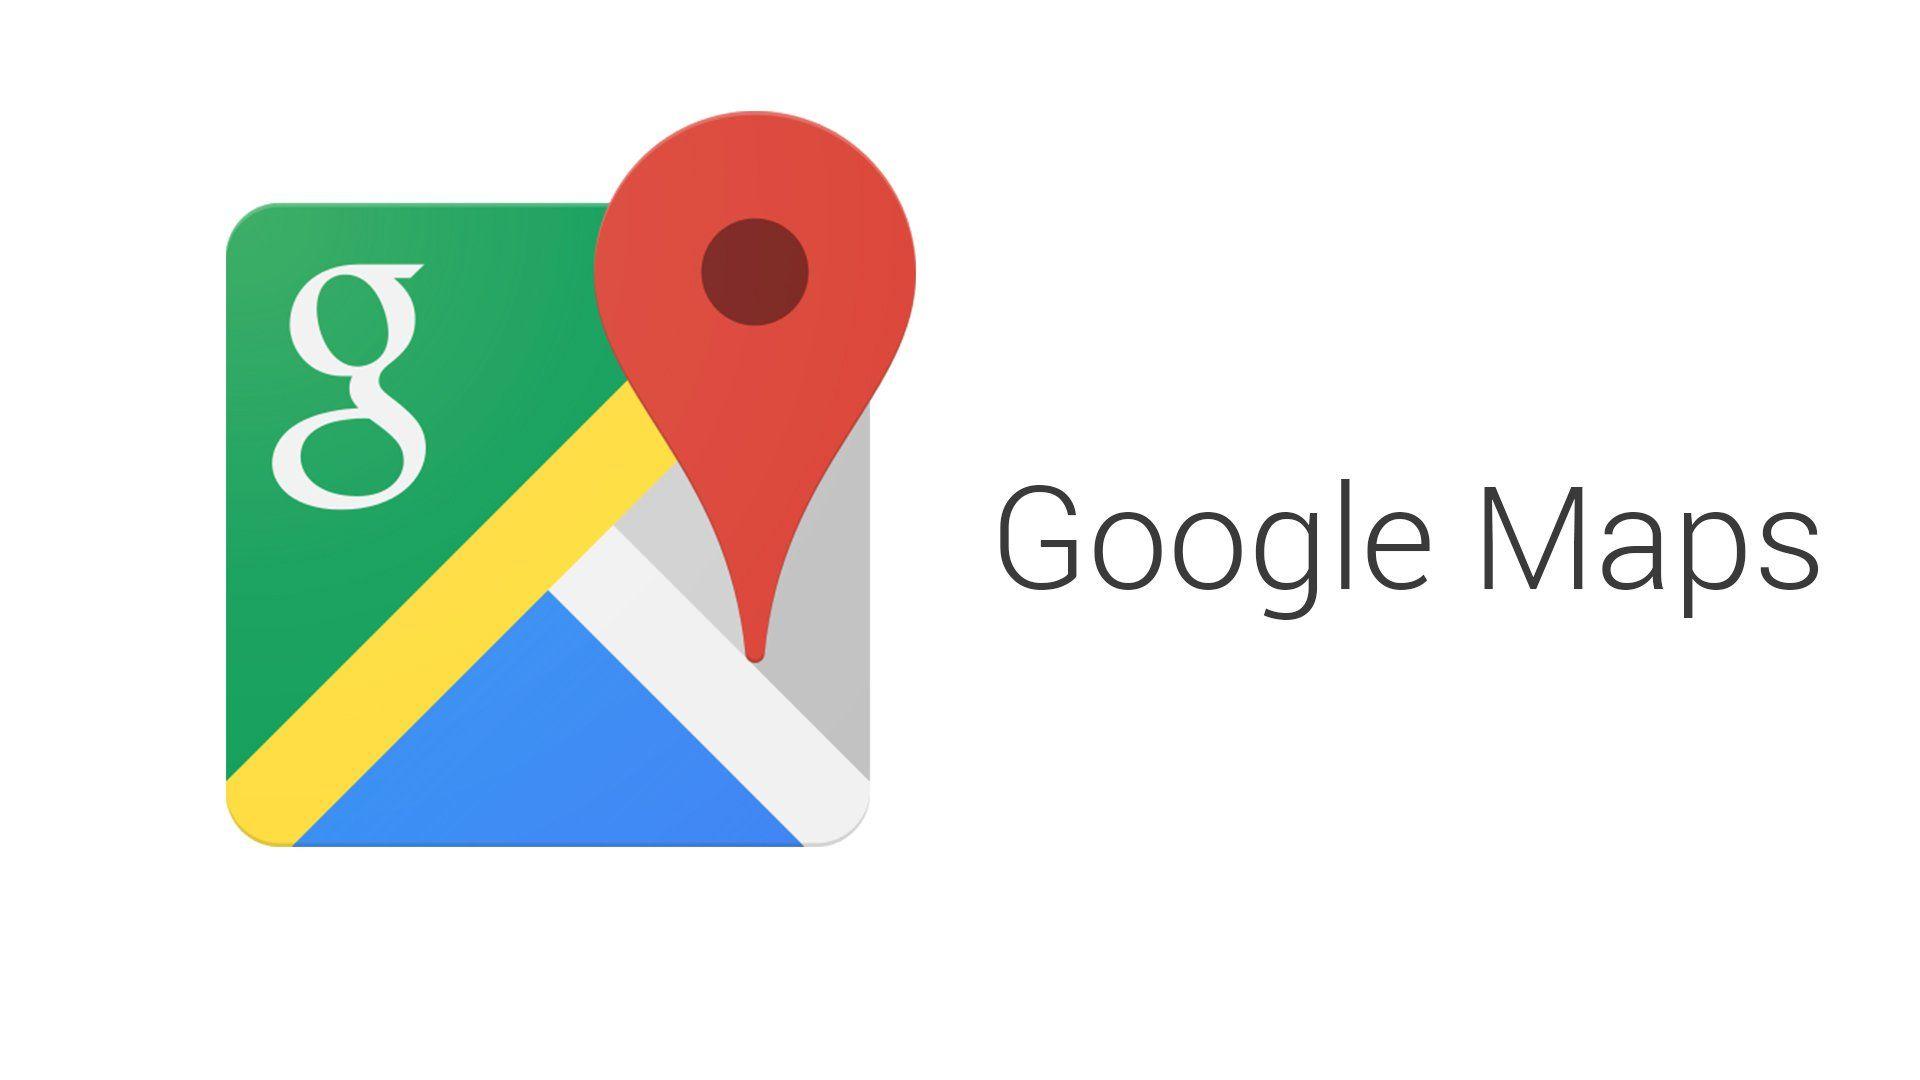 New Google Places Logo - Google Maps Gets Favorite Places Lists and Sharing Options